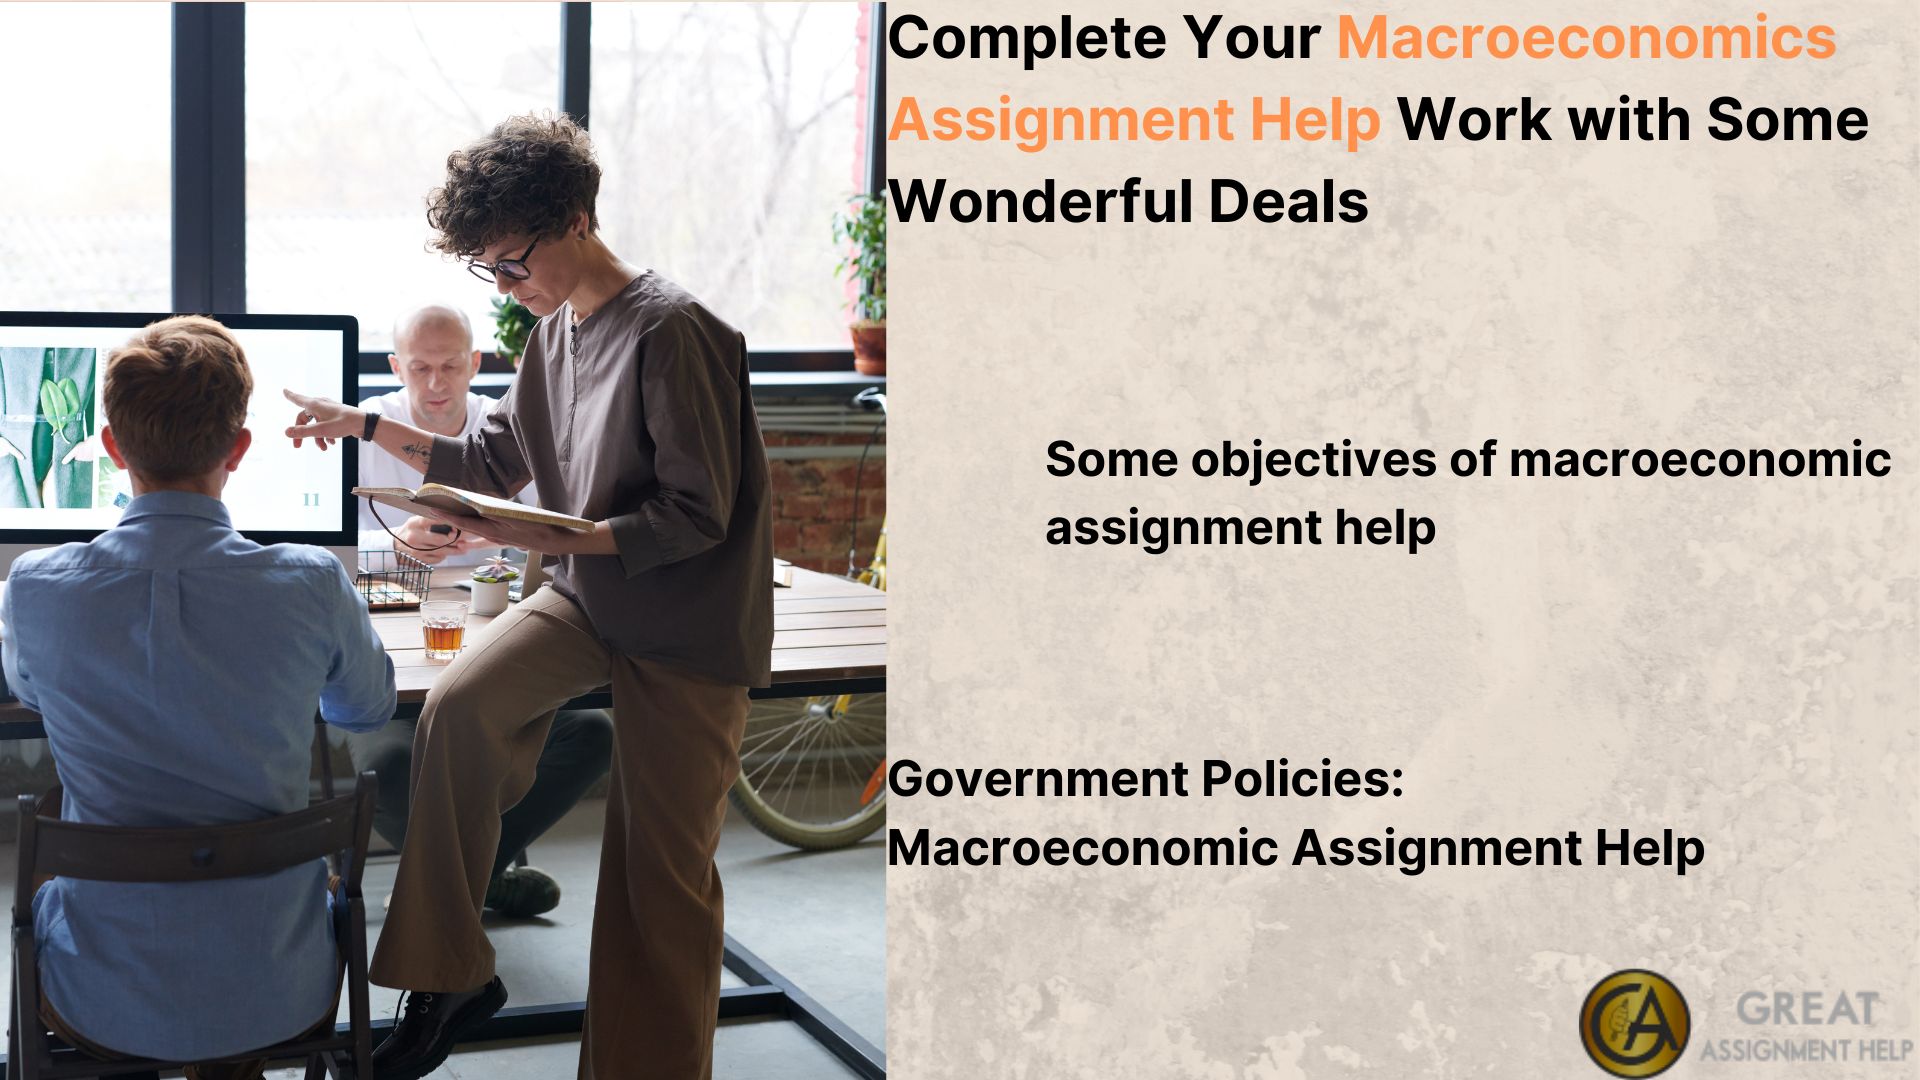 Complete Your Macroeconomics Assignment Help Work with Some Wonderful Deals